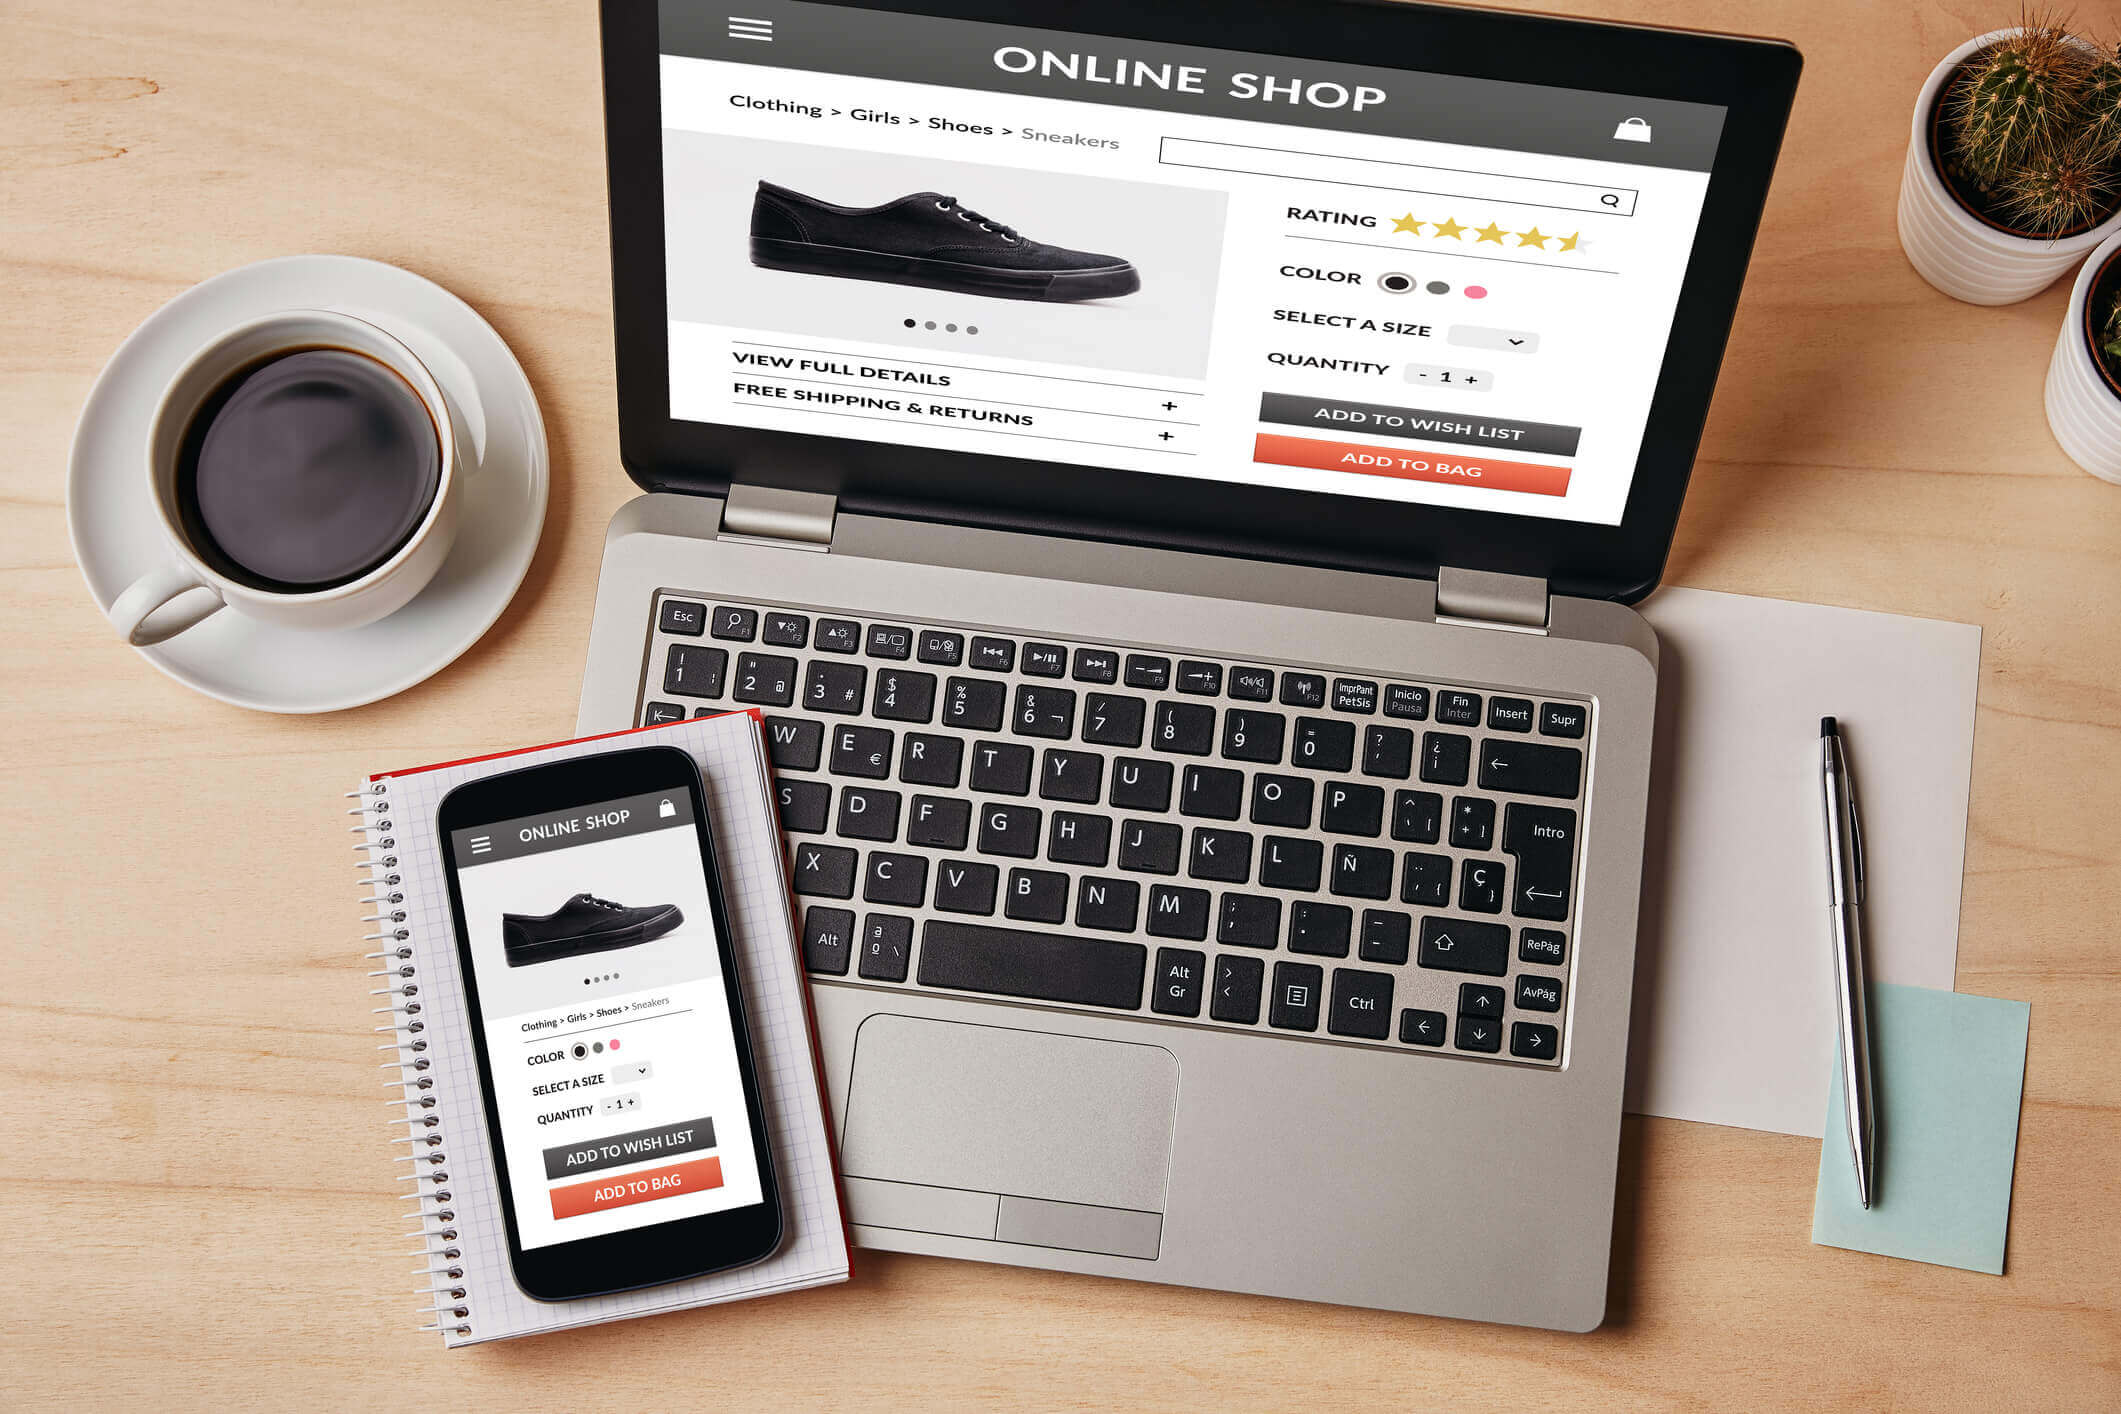 Web Copy Can Help Boost eCommerce Sales